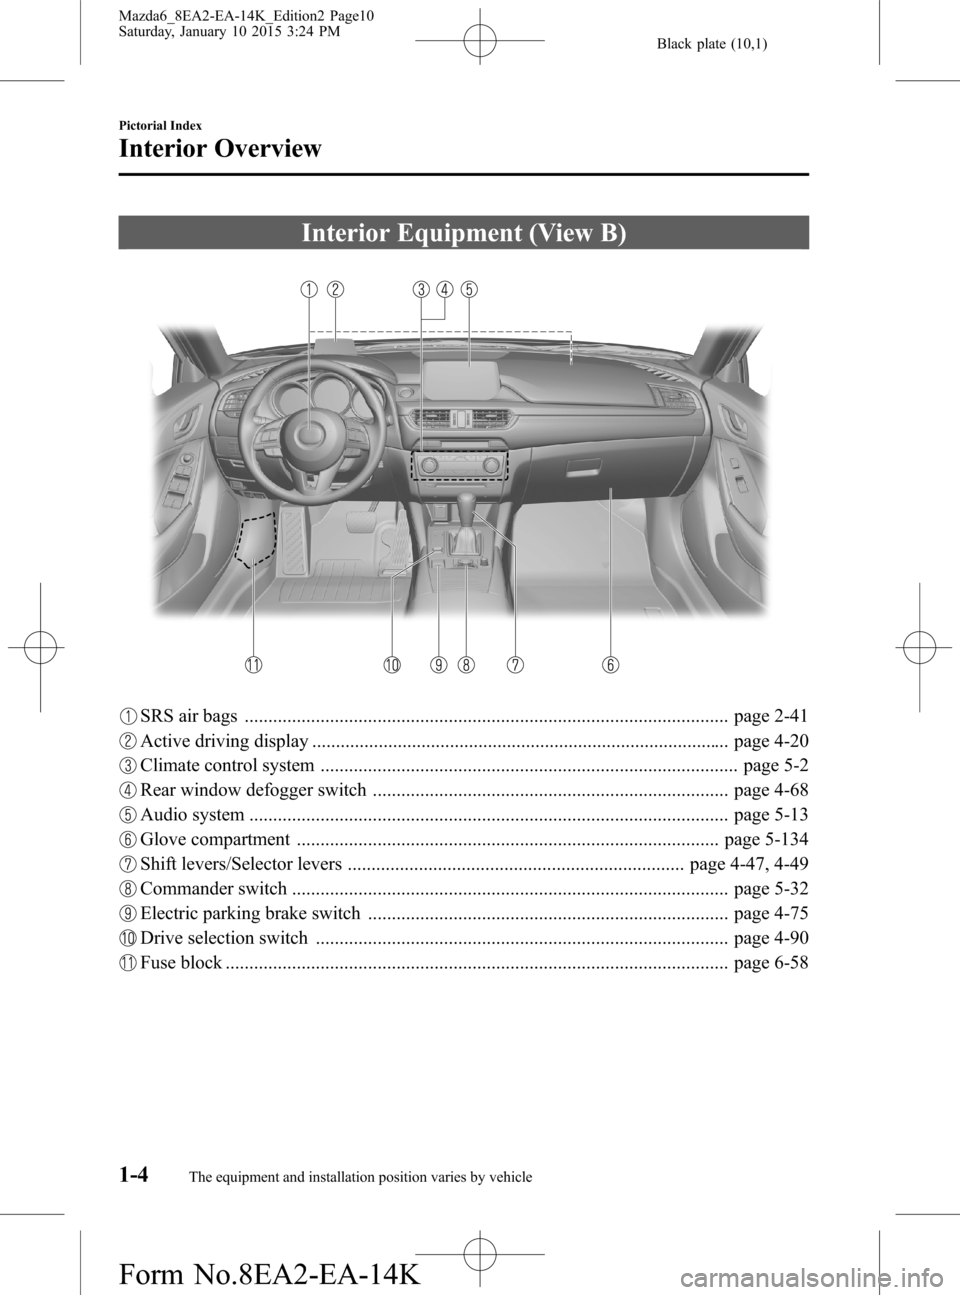 MAZDA MODEL 6 2016  Owners Manual (in English) Black plate (10,1)
Interior Equipment (View B)
SRS air bags ...................................................................................................... page 2-41
Active driving display ....